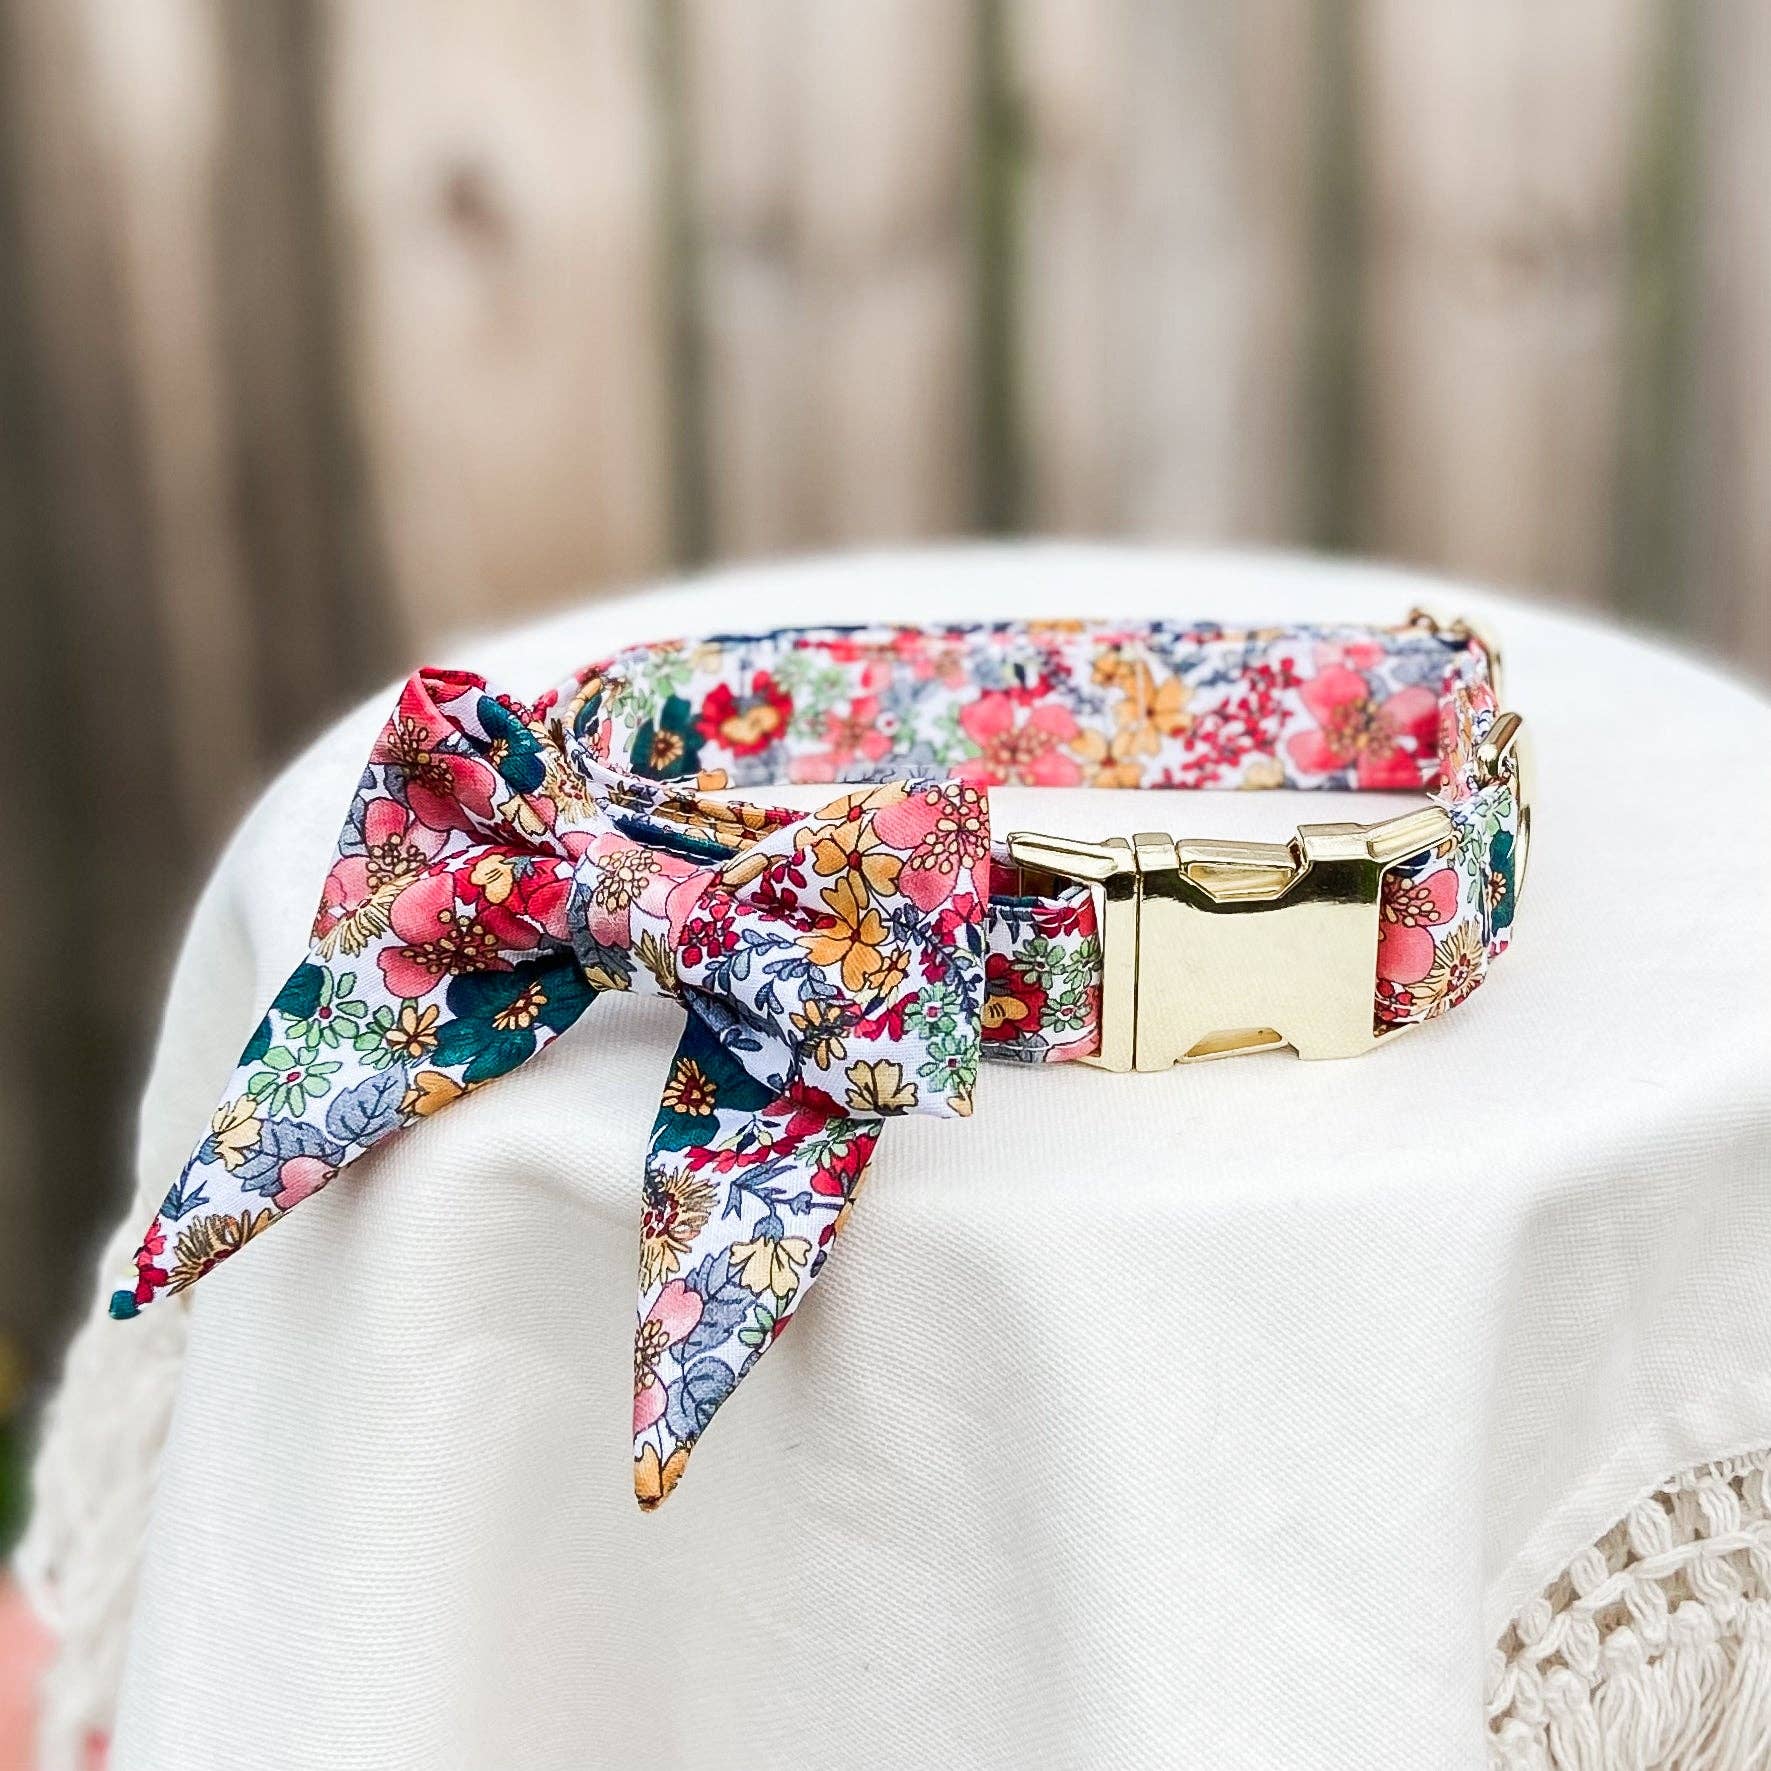 doggish - Vintage inspired floral sailor dog bow tie pet accessory